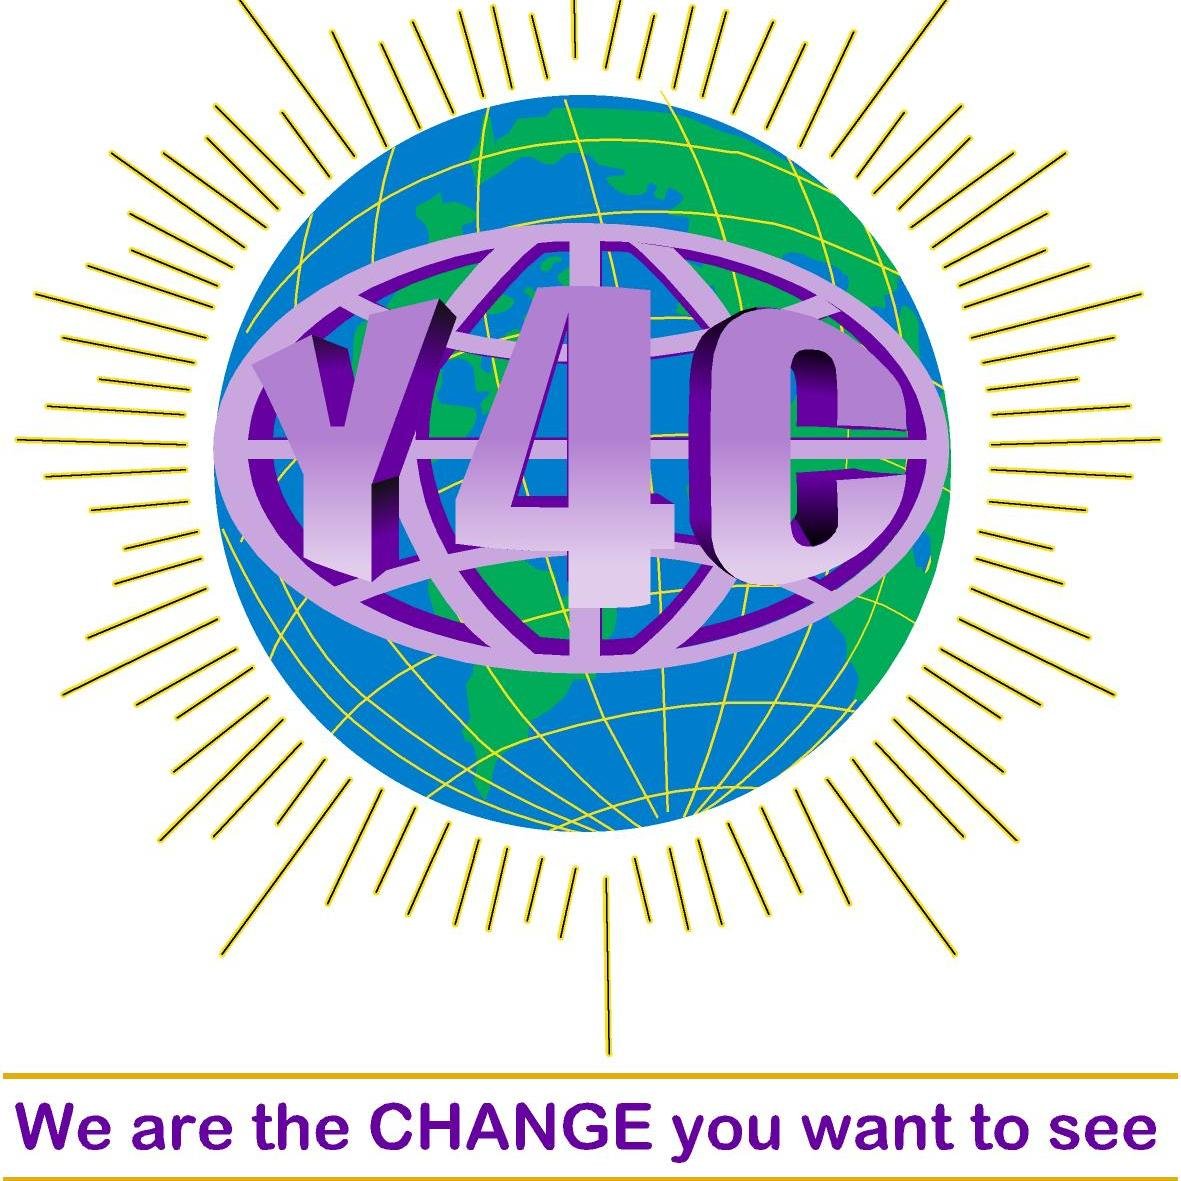 Y4C is an early intervention and pretrial diversion program for at-risk youth ages 8-18.  Y4C is a 501c3 tax exempt organization.